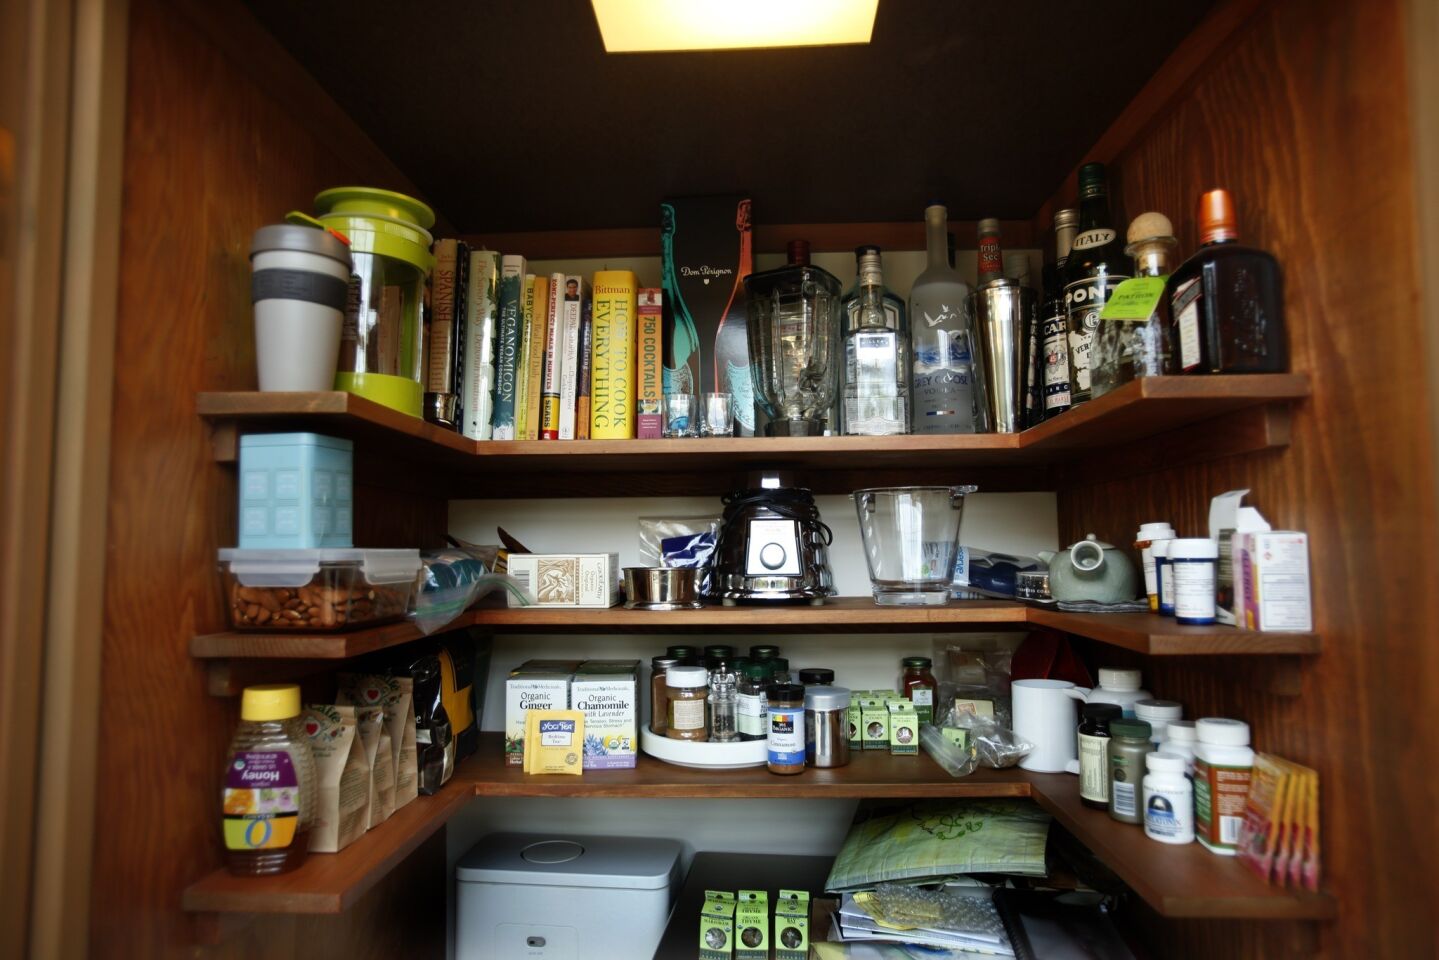 U-shaped shelves make the most of the pantry.